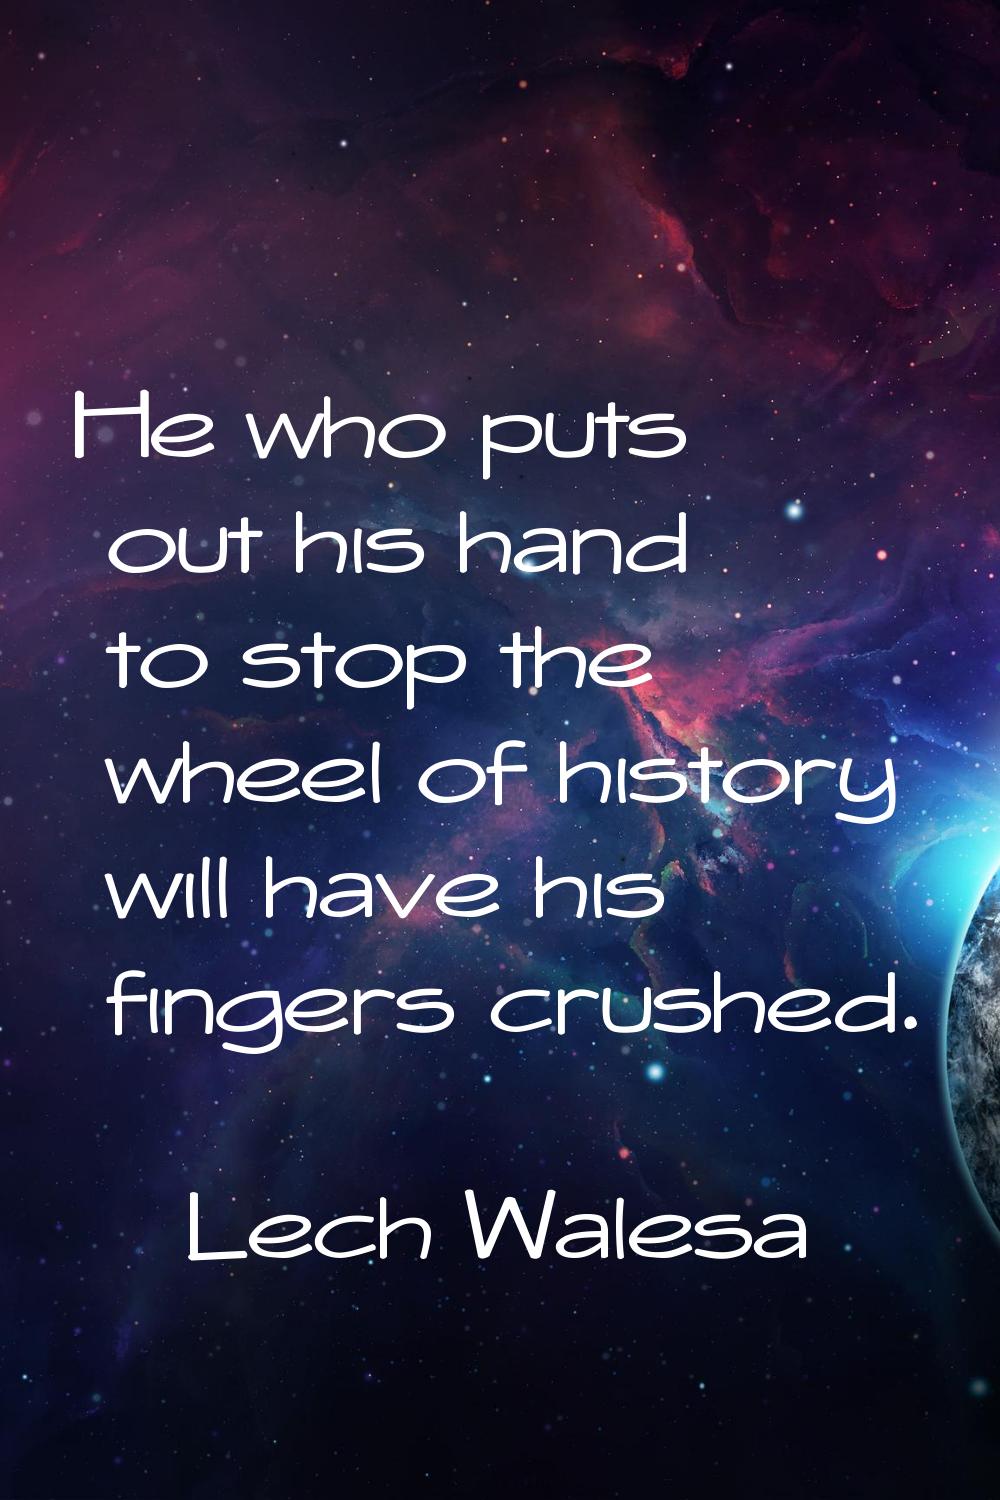 He who puts out his hand to stop the wheel of history will have his fingers crushed.